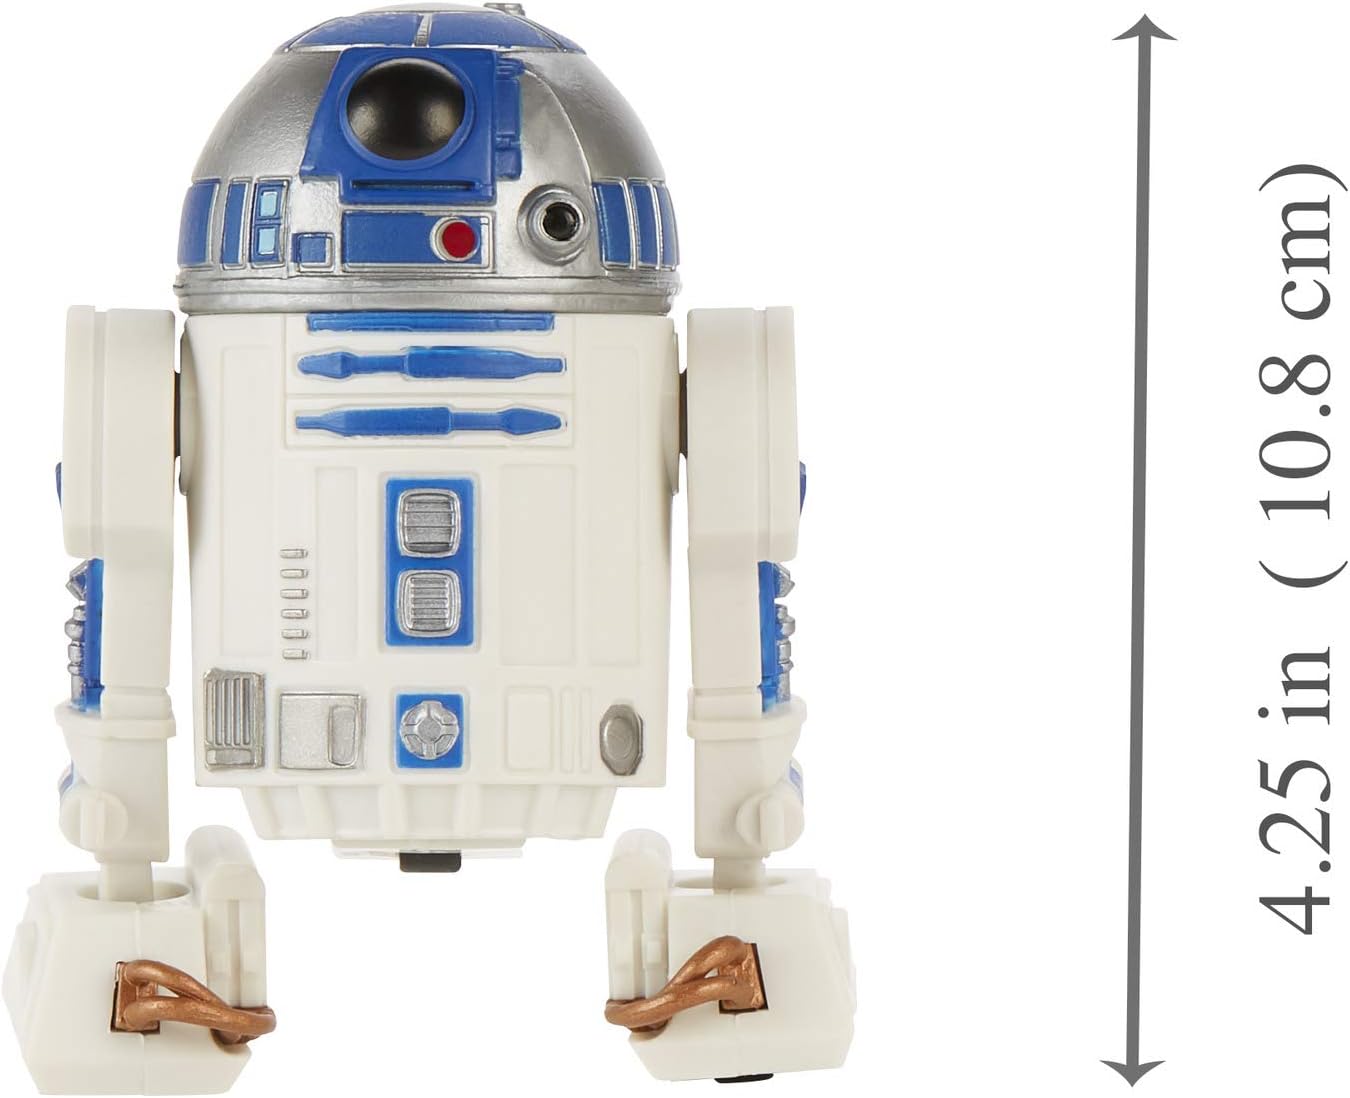 STAR WARS Galaxy of Adventures Droid Trio: R2-D2, BB-8, D-O Action Figure 3-Pack - 5" Scale Toys with Exciting Action Features for Kids Ages 4 and Up